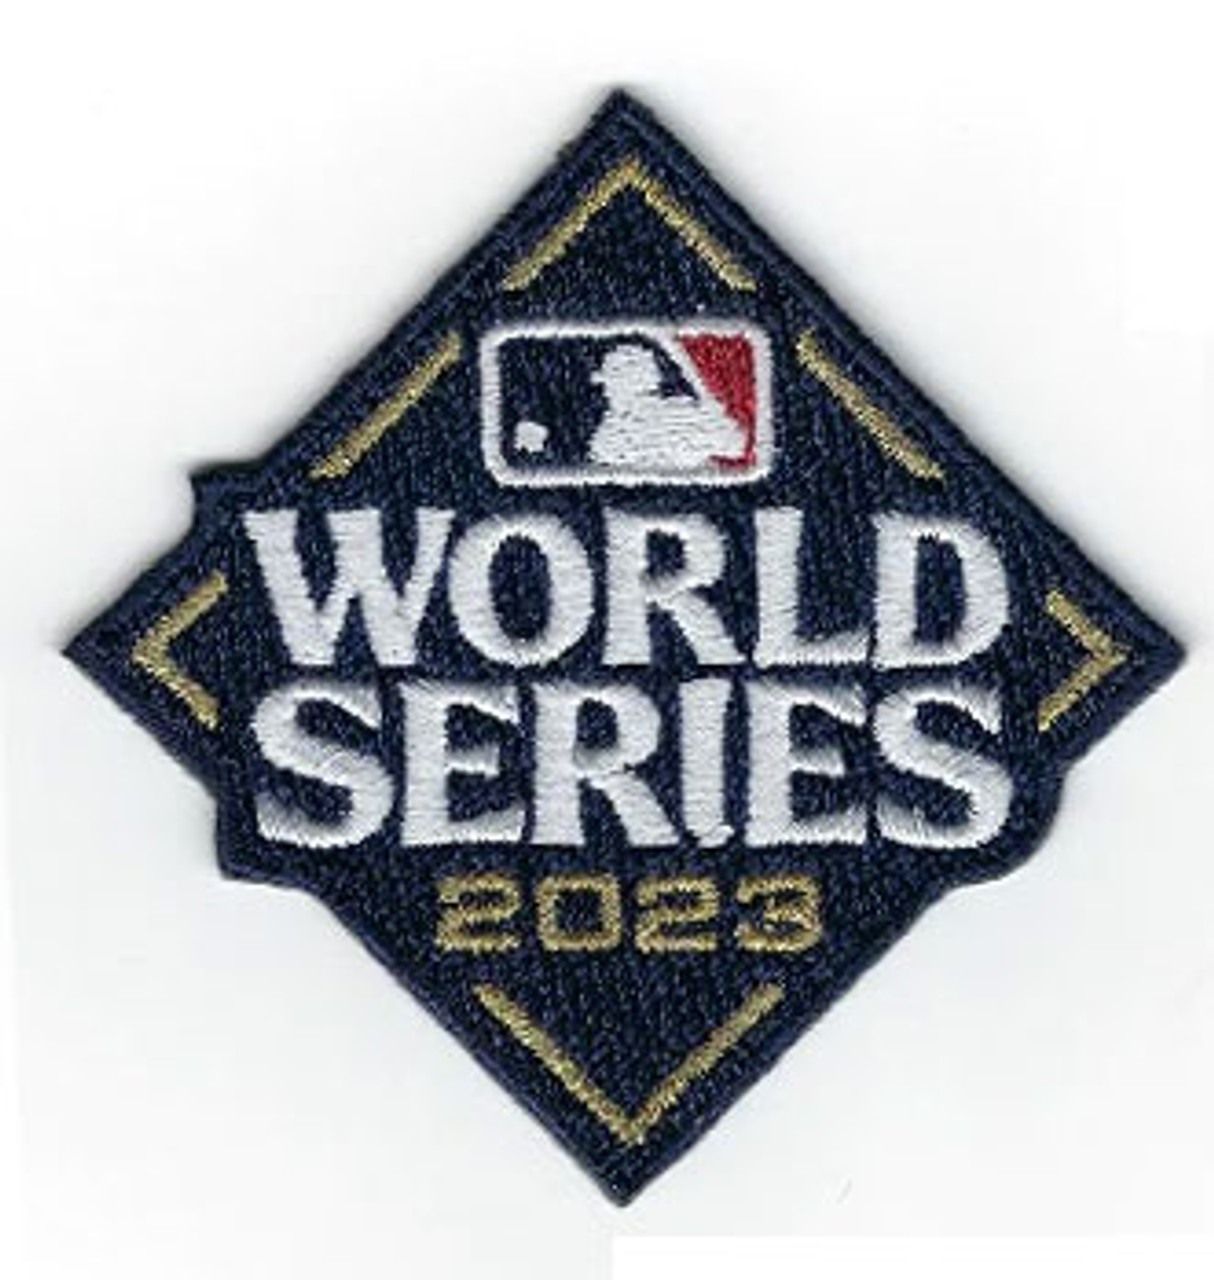 2022 MLB All Star Game Embroidered Jersey Patch Los Angeles